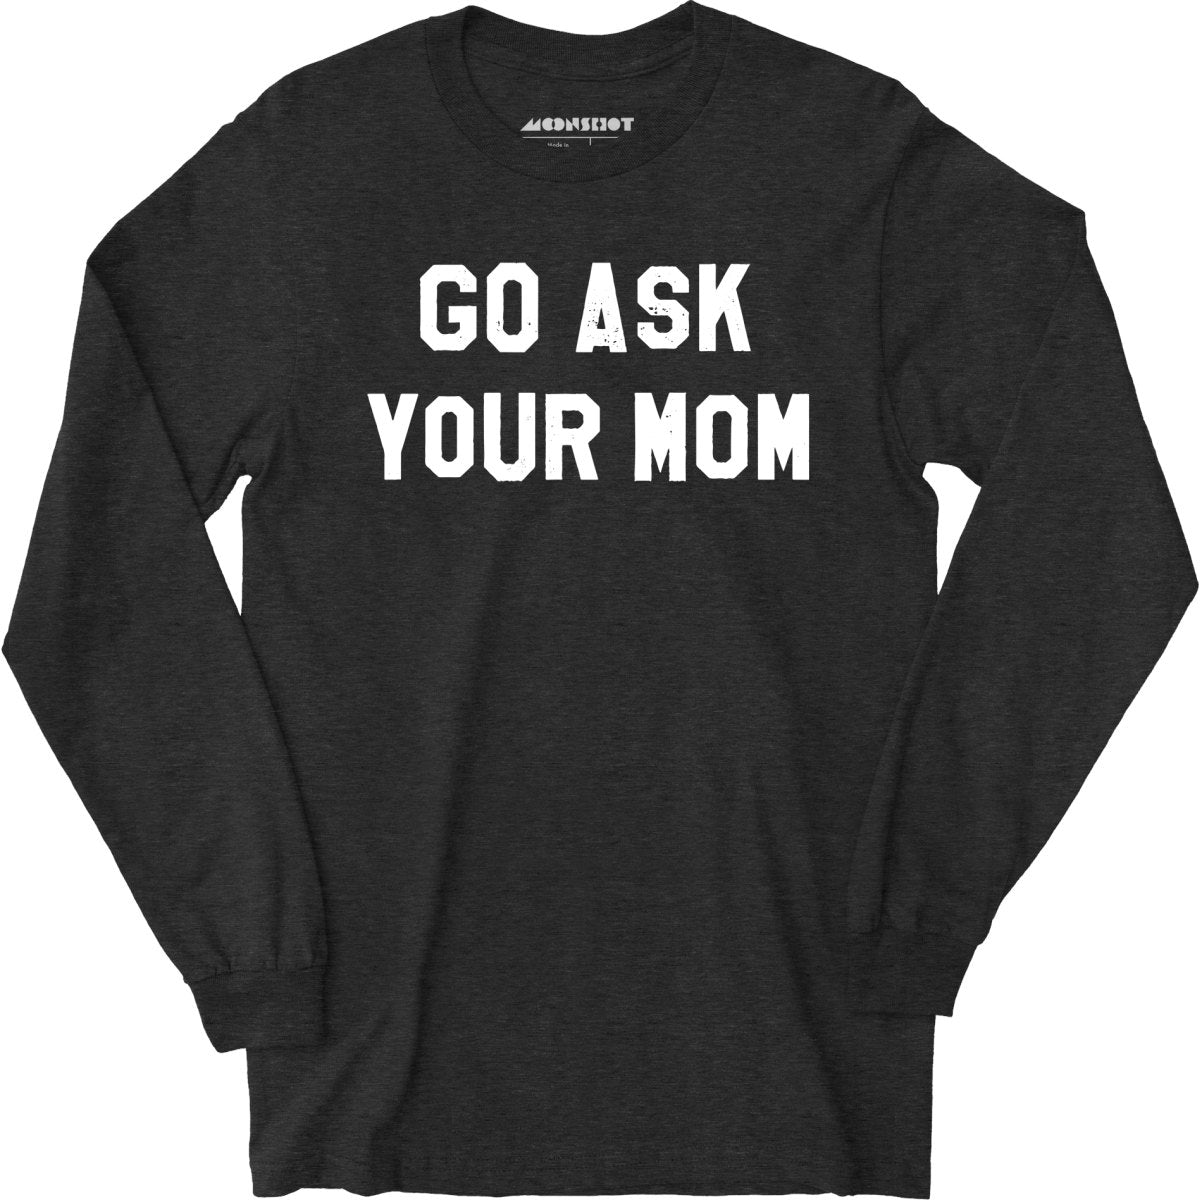 Go Ask Your Mom - Long Sleeve T-Shirt